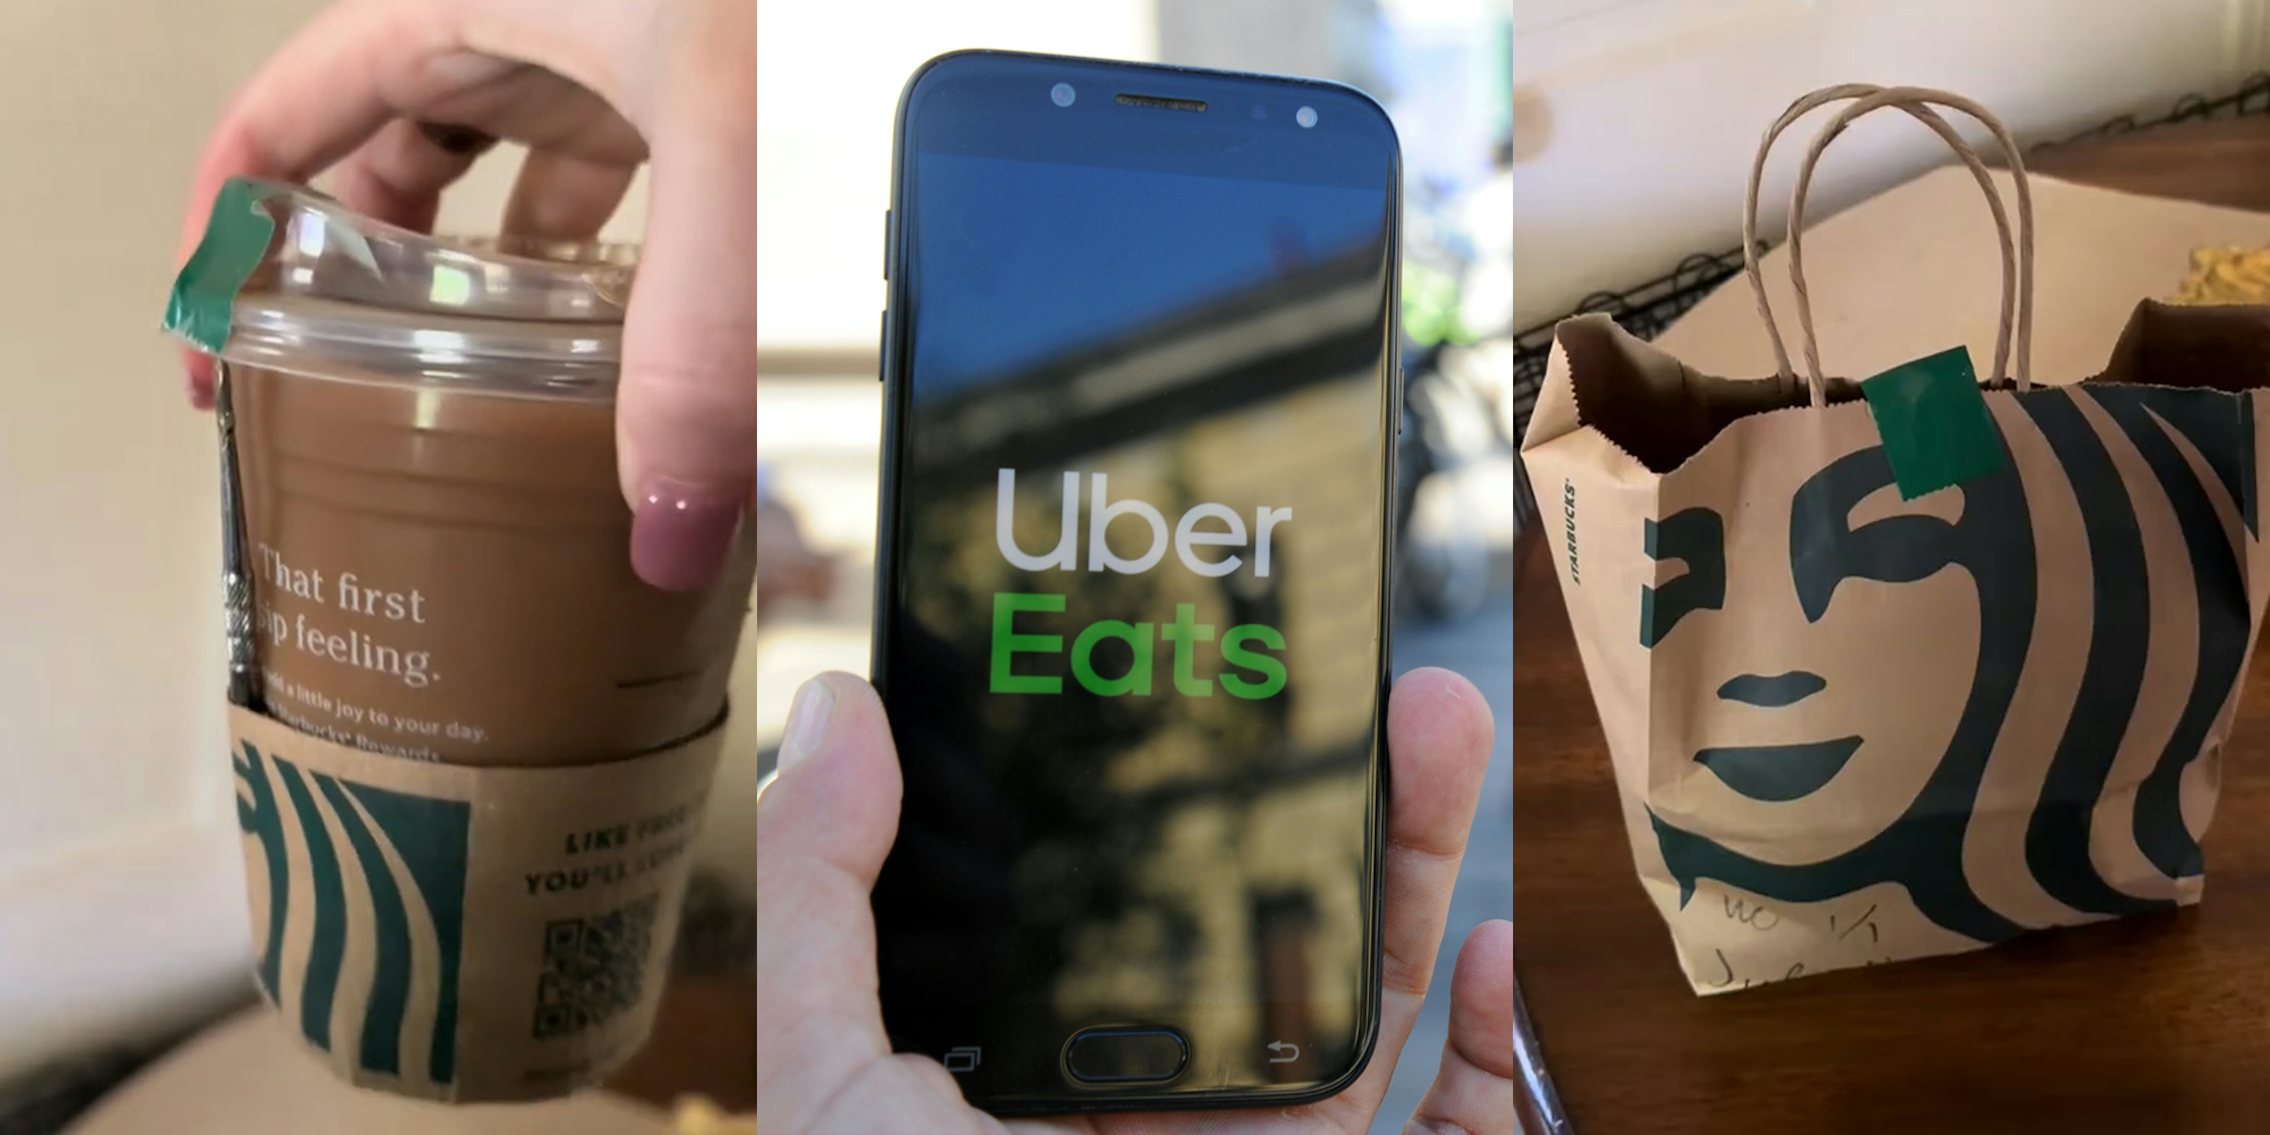 Starbucks coffee with dab spoon attached (l) Uber Eats app open on phone in hand (c) Starbucks bag on table (r)